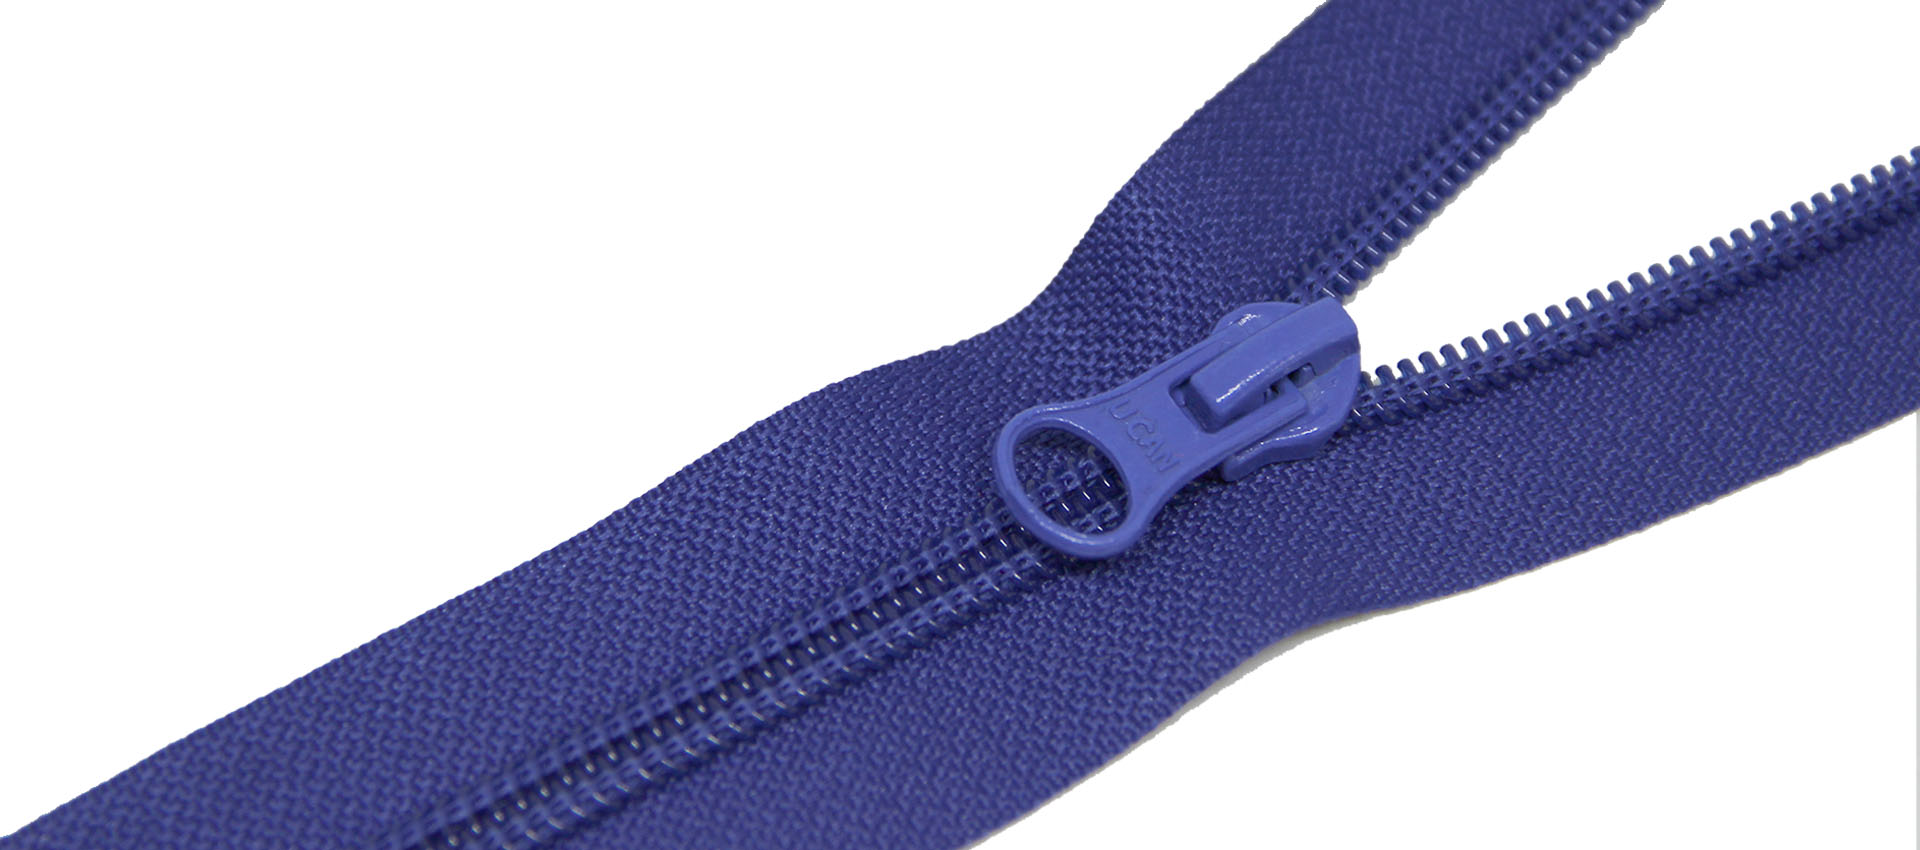 UCAN Zippers USA  Los Angeles 90058 – UCAN Zippers USA is the last zipper  manufacturer in Los Angeles and one of the very few in the US